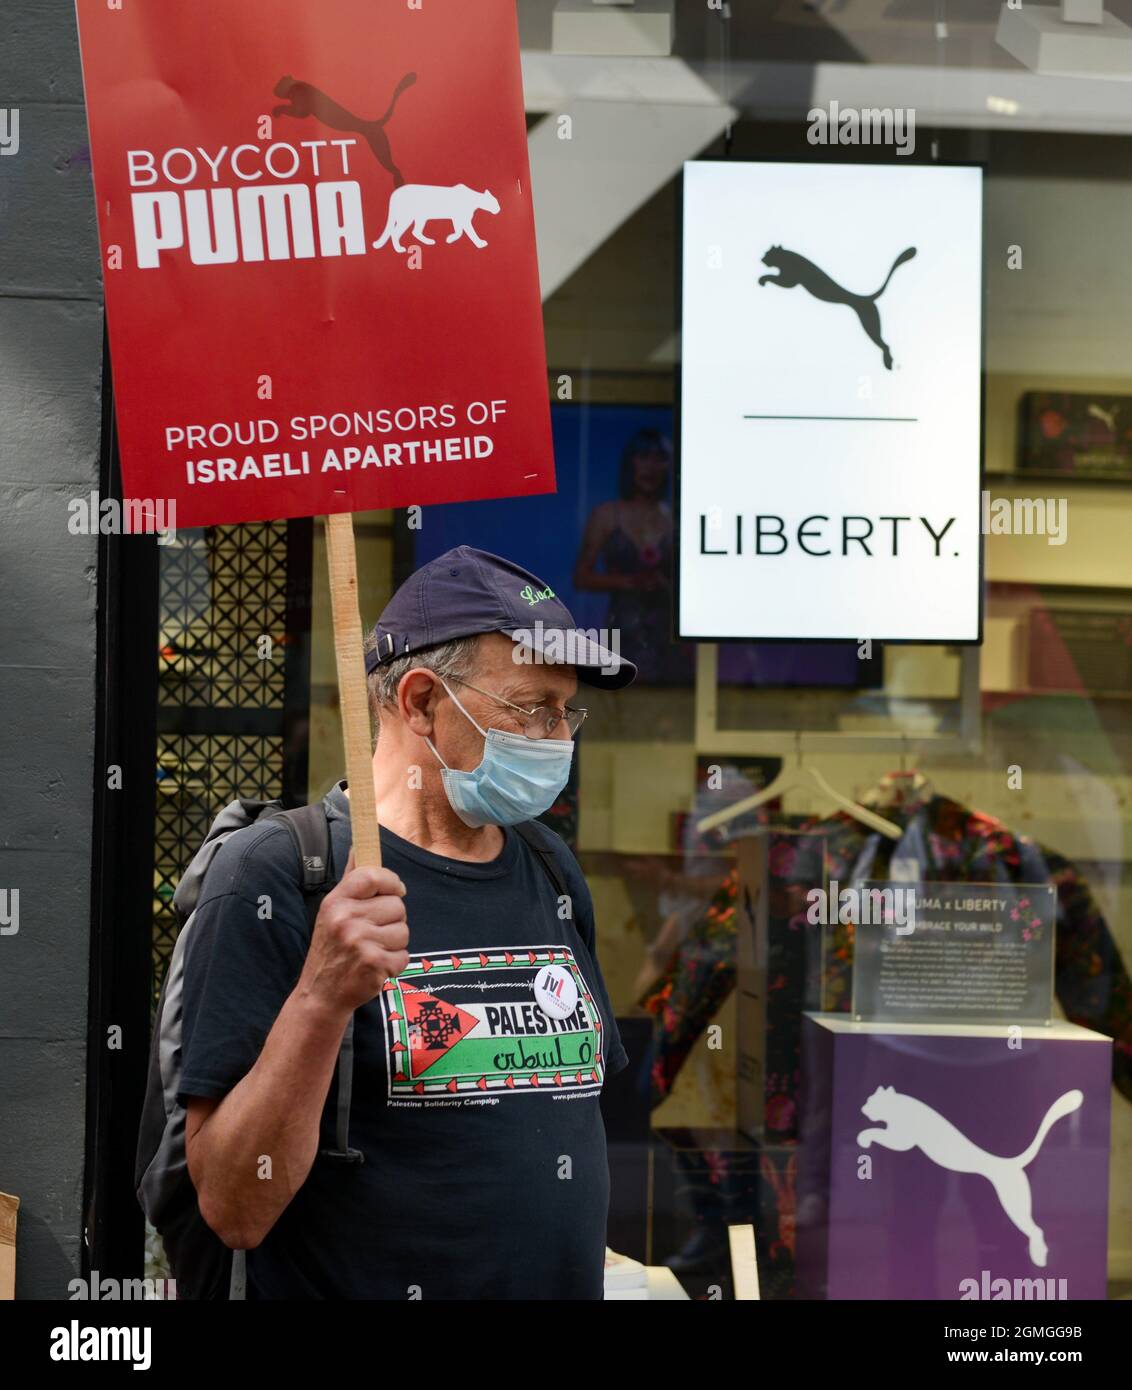 A protestor holding a placard expressing his opinion, during the demonstration.Boycott Puma protest organised by Palestine Solidarity Campaign and FOA (Friends of Al Aqsa) at Puma flagship store on Carnaby Street, London. Activists demonstrated against Puma's sponsorship of the IFA (Israel Football Association). (Photo by Thomas Krych / SOPA Images/Sipa USA) Stock Photo